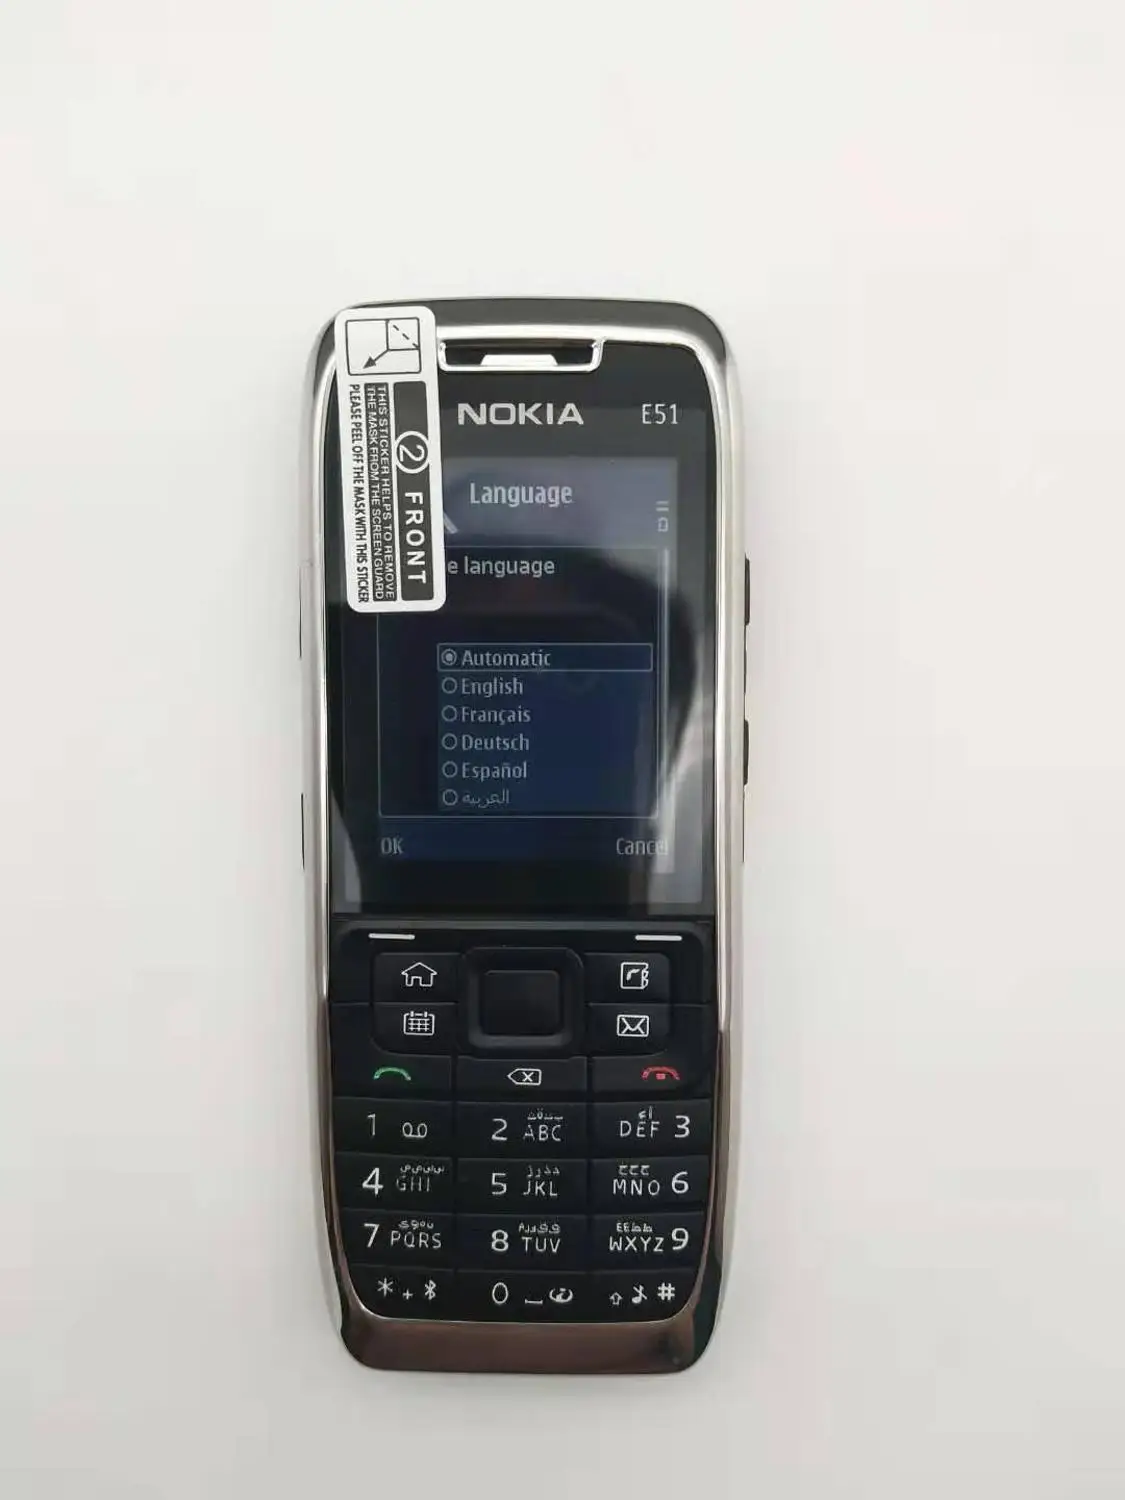 nokia e51 with camera refurbished original mobile phones java wifi unlock cell phone refurbished in stock free global shipping